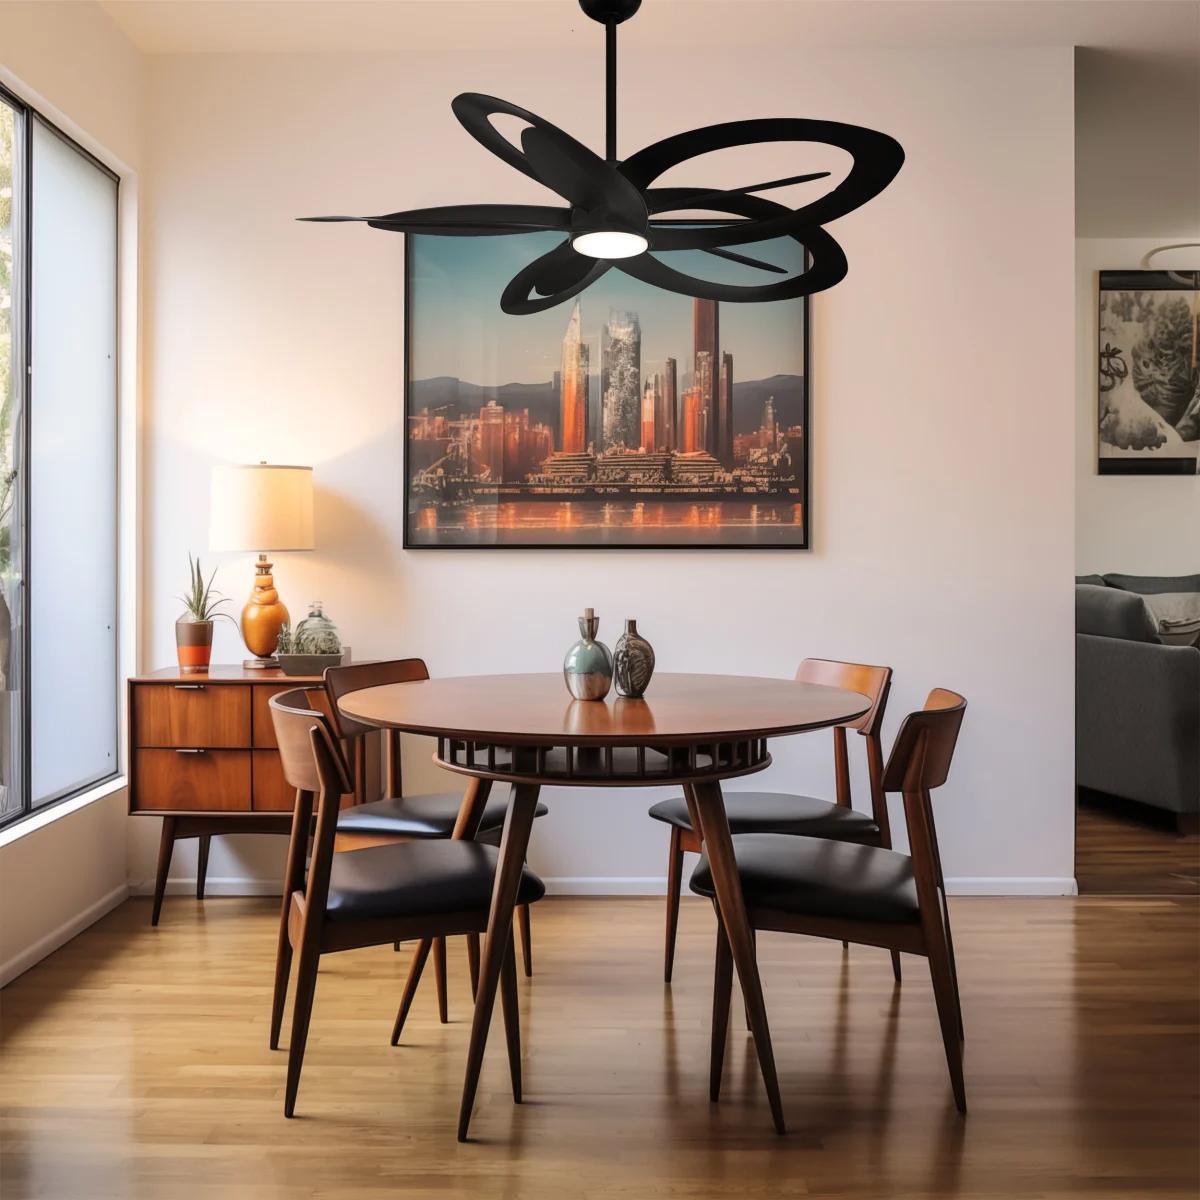 Pinup 60 Inch LED Ceiling Fan with Light Kit and Remote, Coal Finish - Bees Lighting